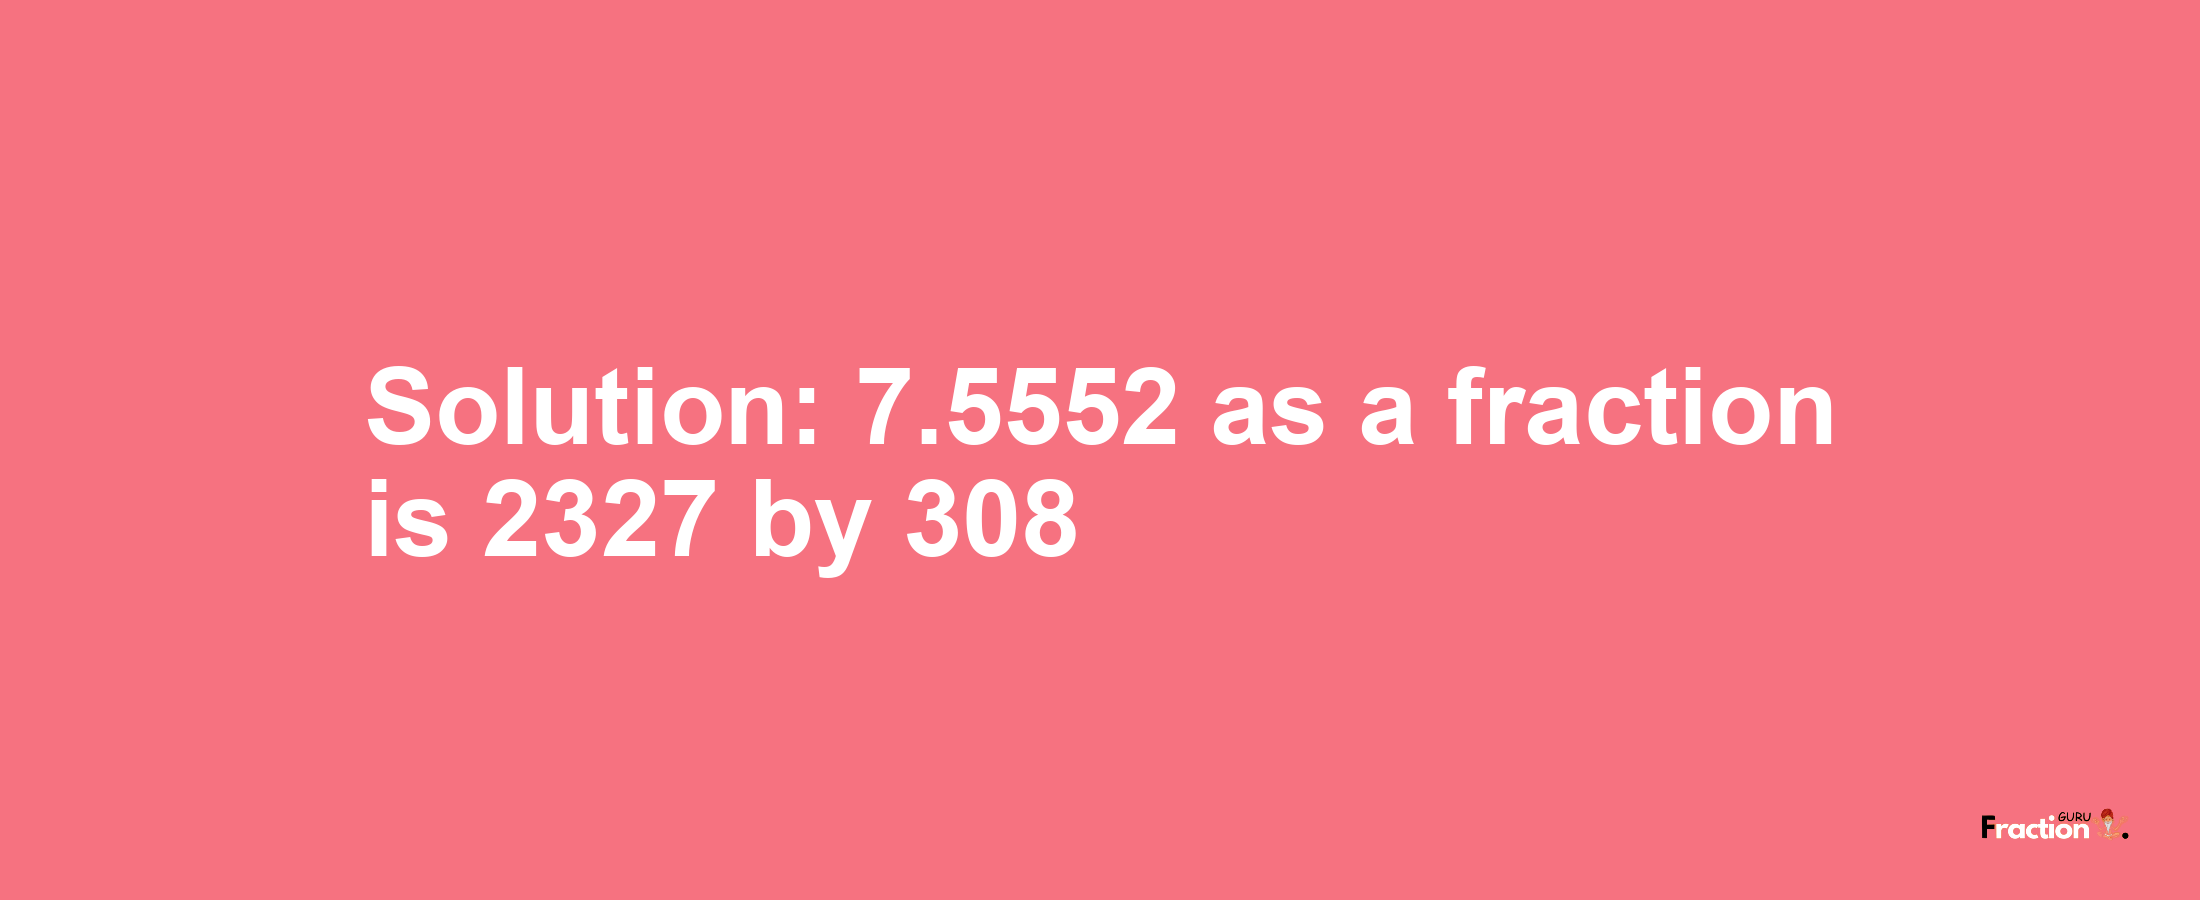 Solution:7.5552 as a fraction is 2327/308